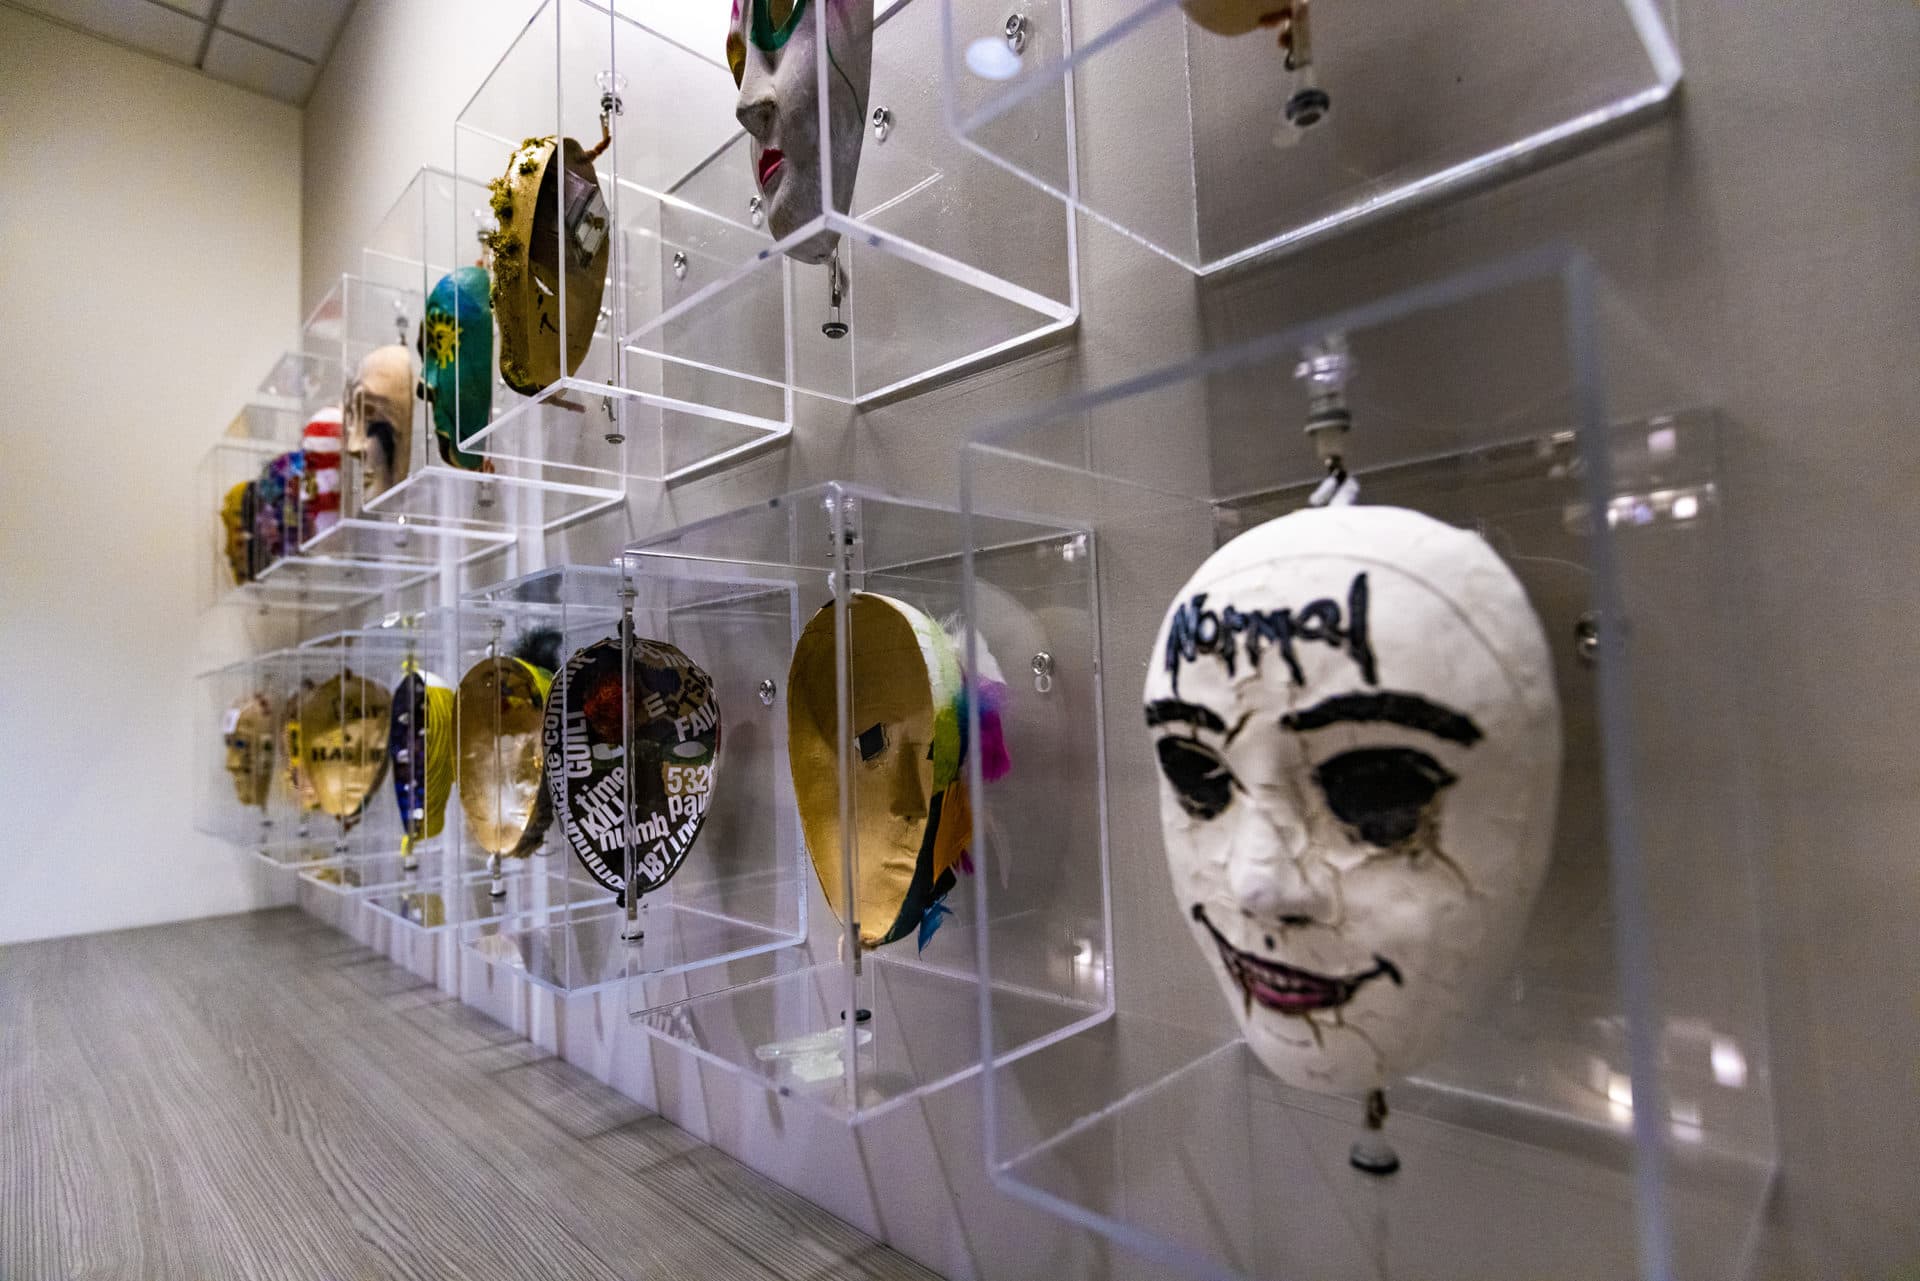 Home Base has an art therapy program during which veterans paint masks. The outside of the mask represents how they project themselves to the world, the inside represent their feelings and experiences. (Jesse Costa/WBUR)